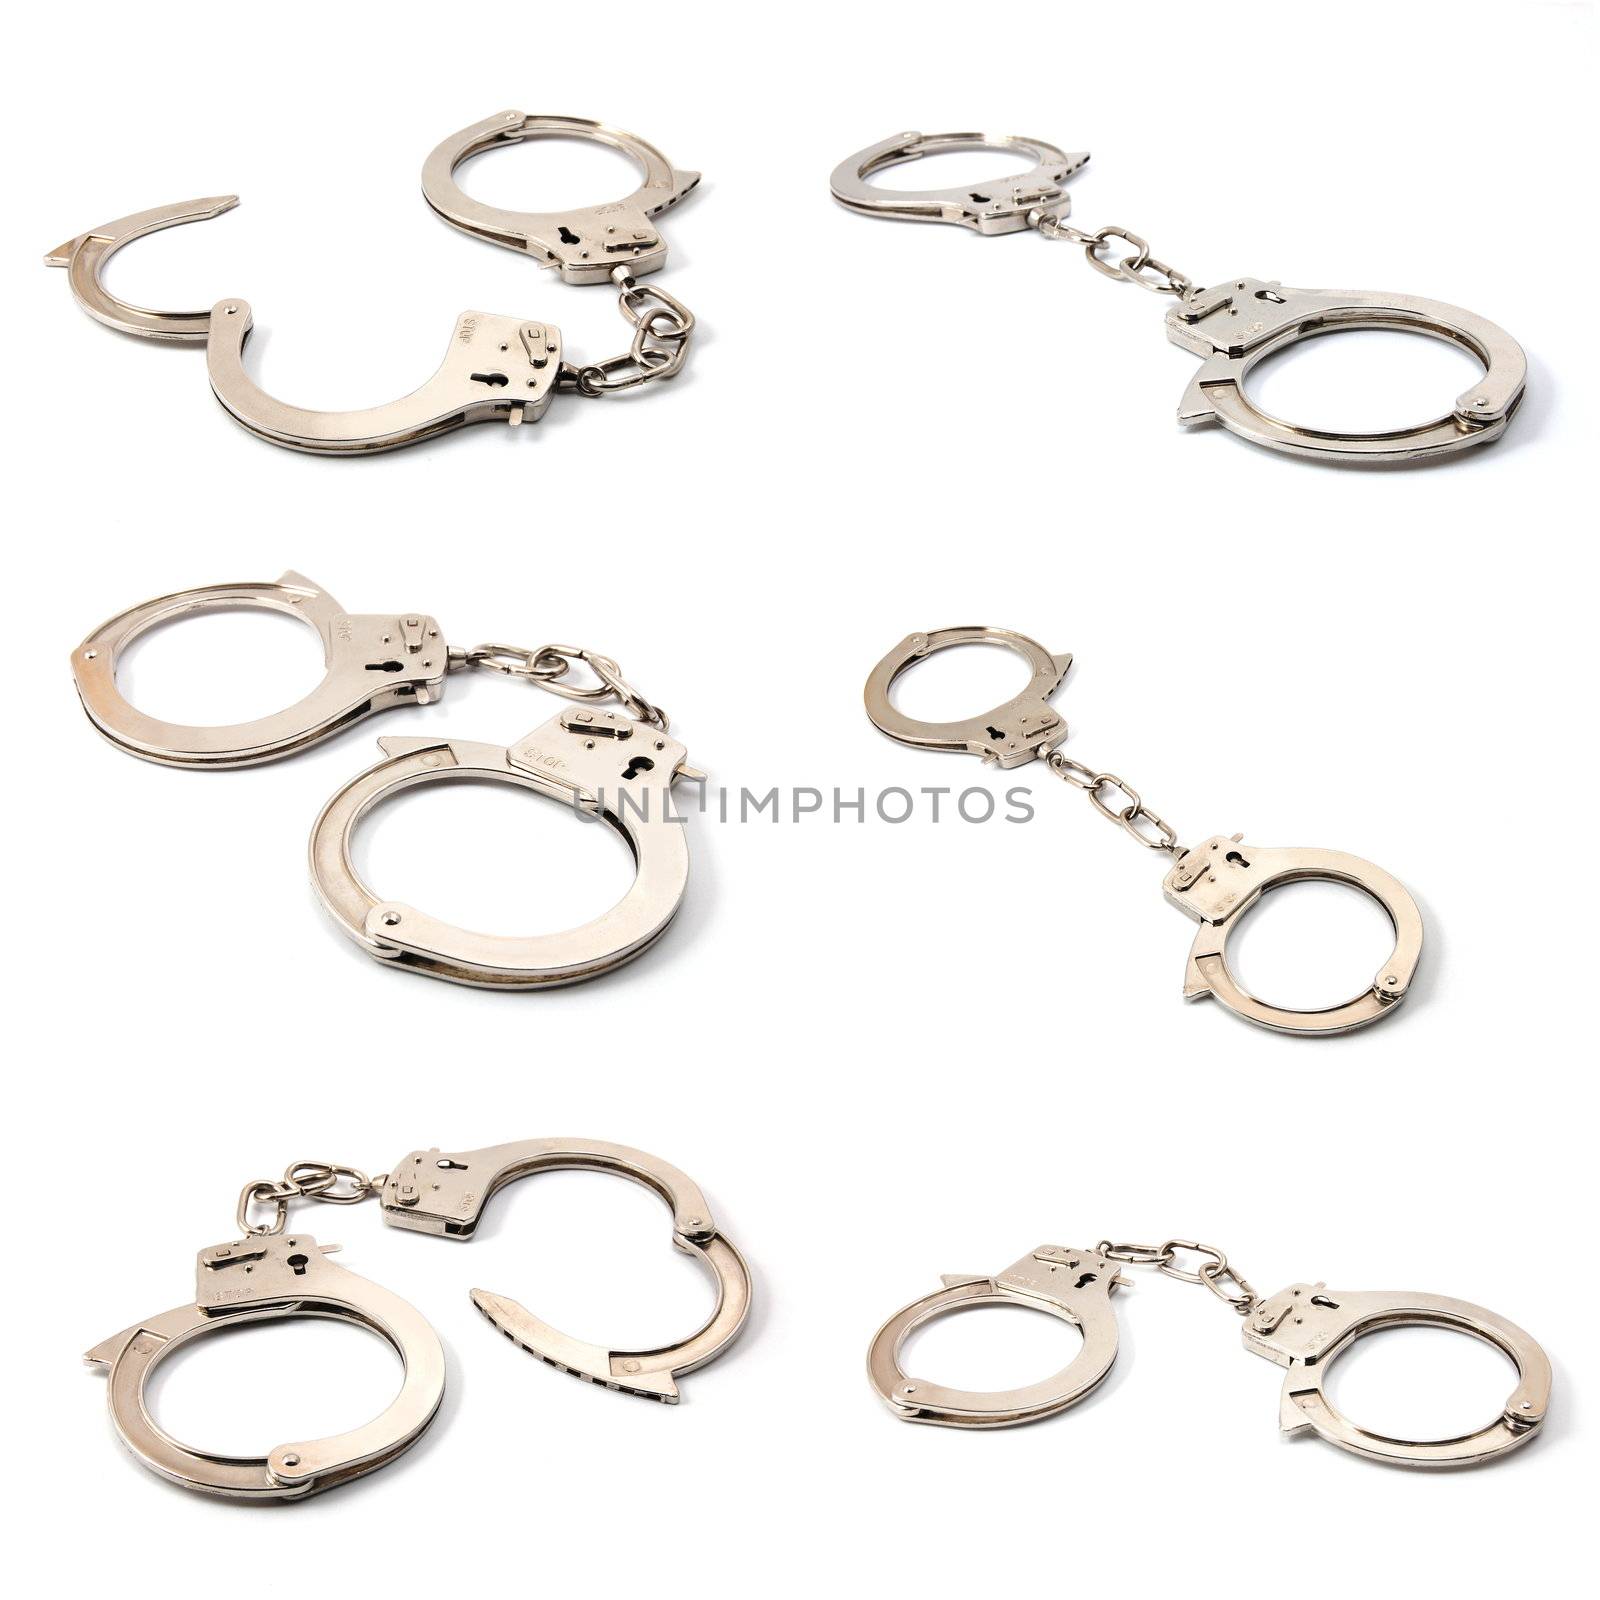 silver handcuffs collection isolated on white background